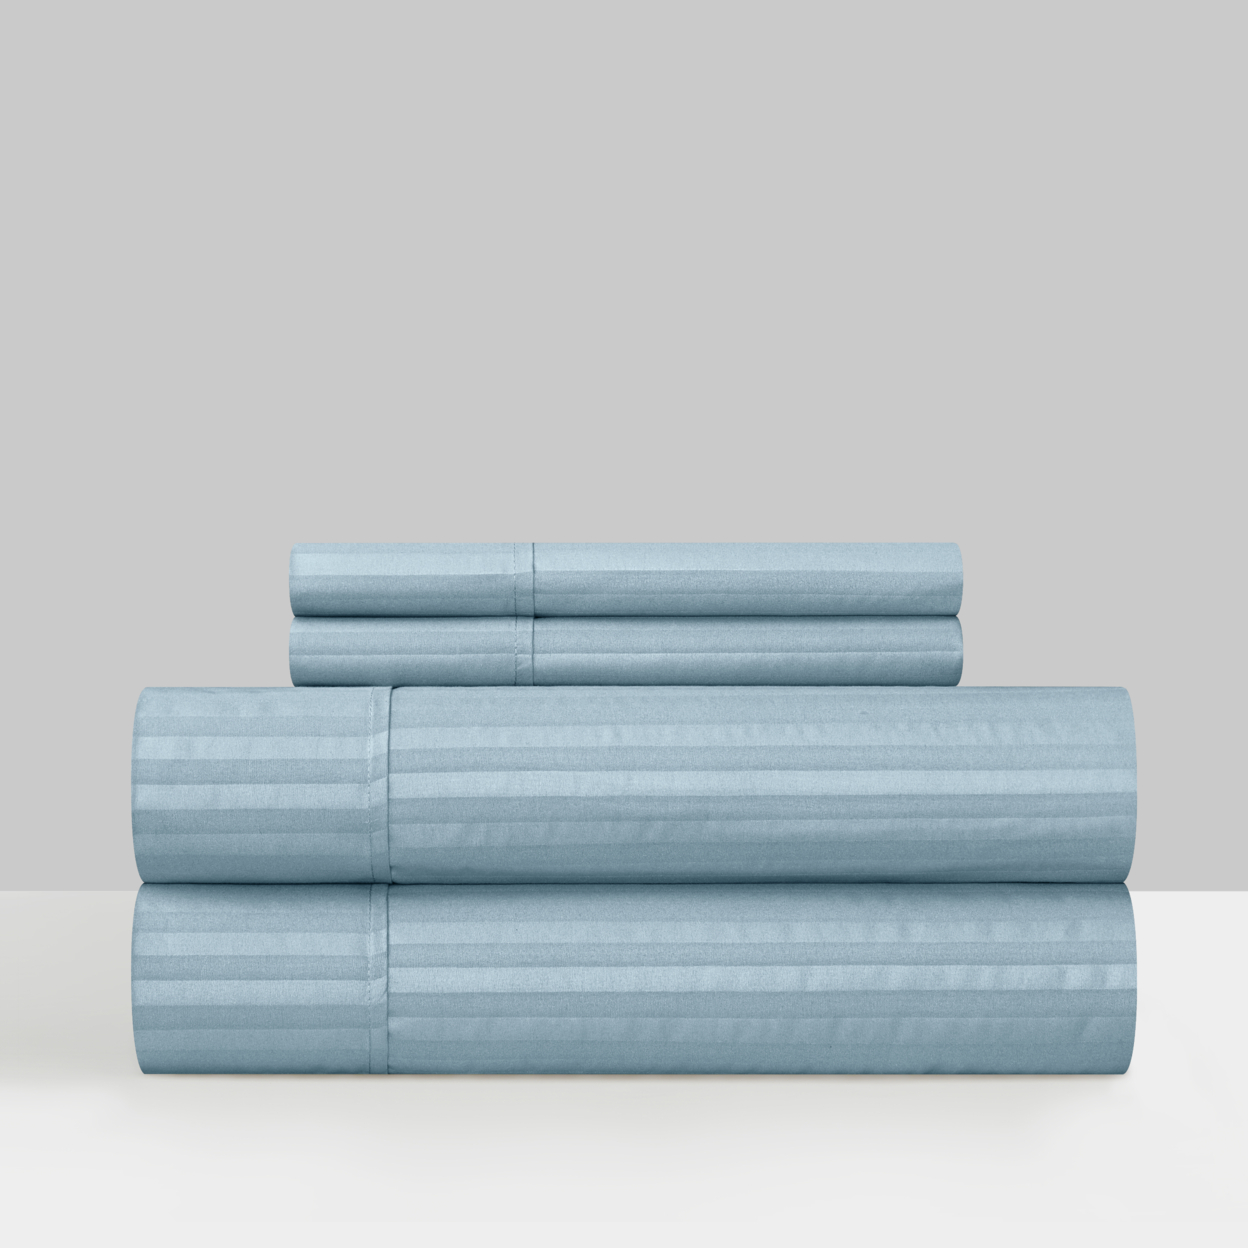 Shina 3 Or 4 Piece Sheet Set Solid Color Striped Pattern Technique - Blue, Queen